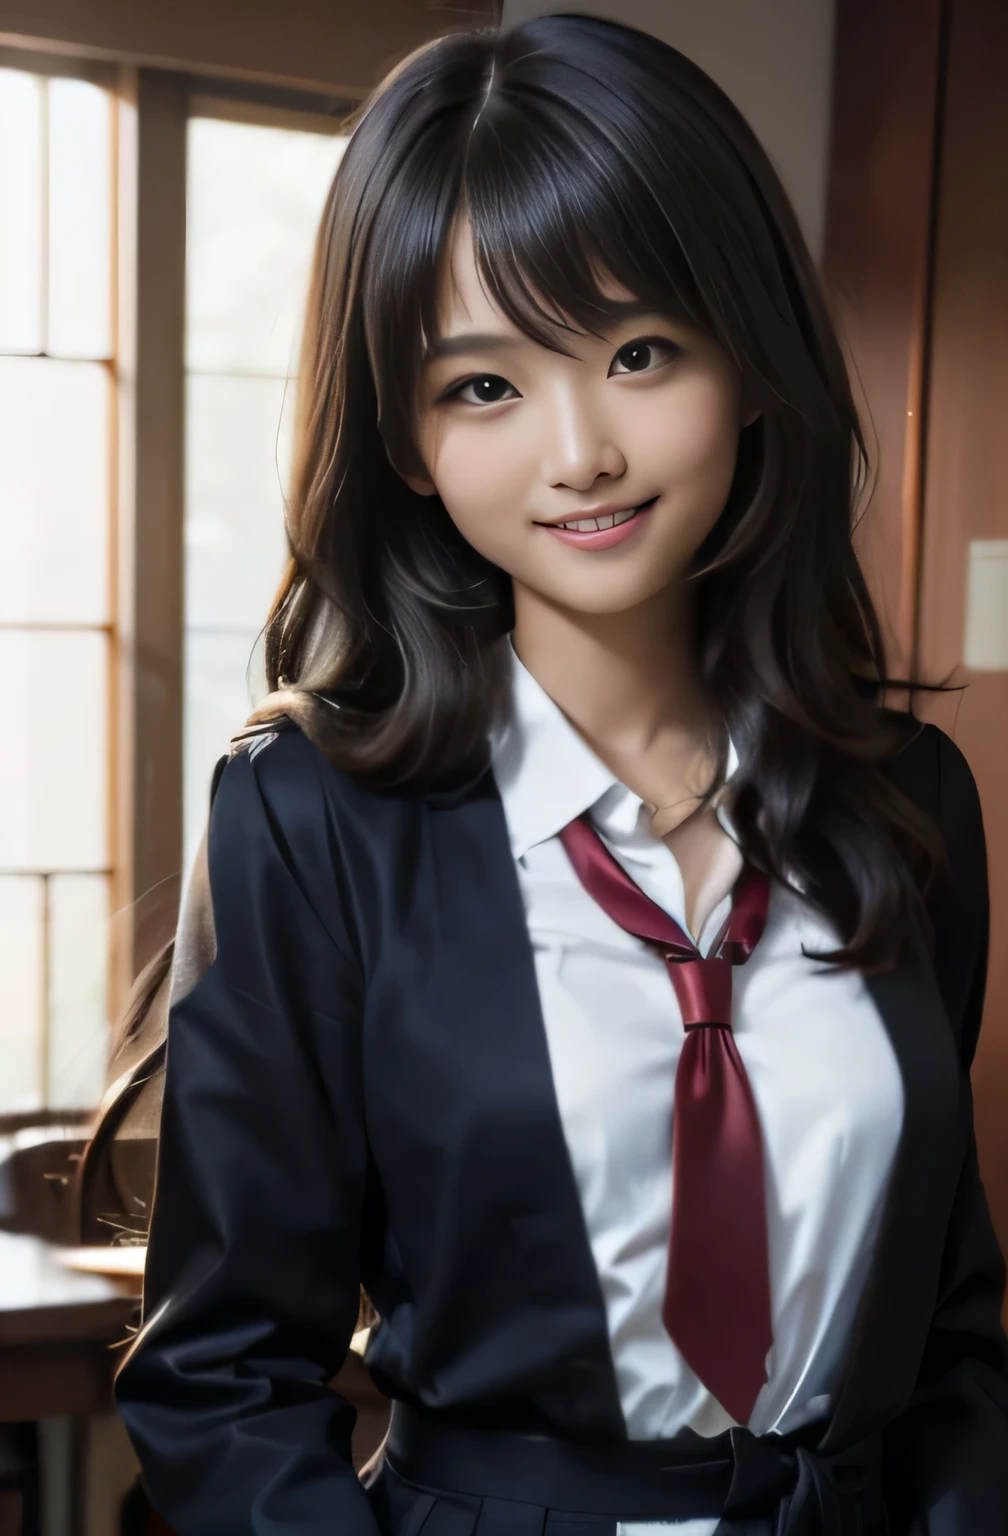 highest quality、shape、 Super detailed、finely、 High resolution、8k wallpaper、perfect dynamic composition shape、17 year old beautiful girl、A neat and mature high school girl、detailed beautiful face、detailed beautiful eyes、rough skin、A faint smile、small breasts、bold sexy pose、((high school girl uniform、long hair:1.4))、((looking at the viewer、smile))、((open chest shirt:1.3))、(((loose tie:1.4)))